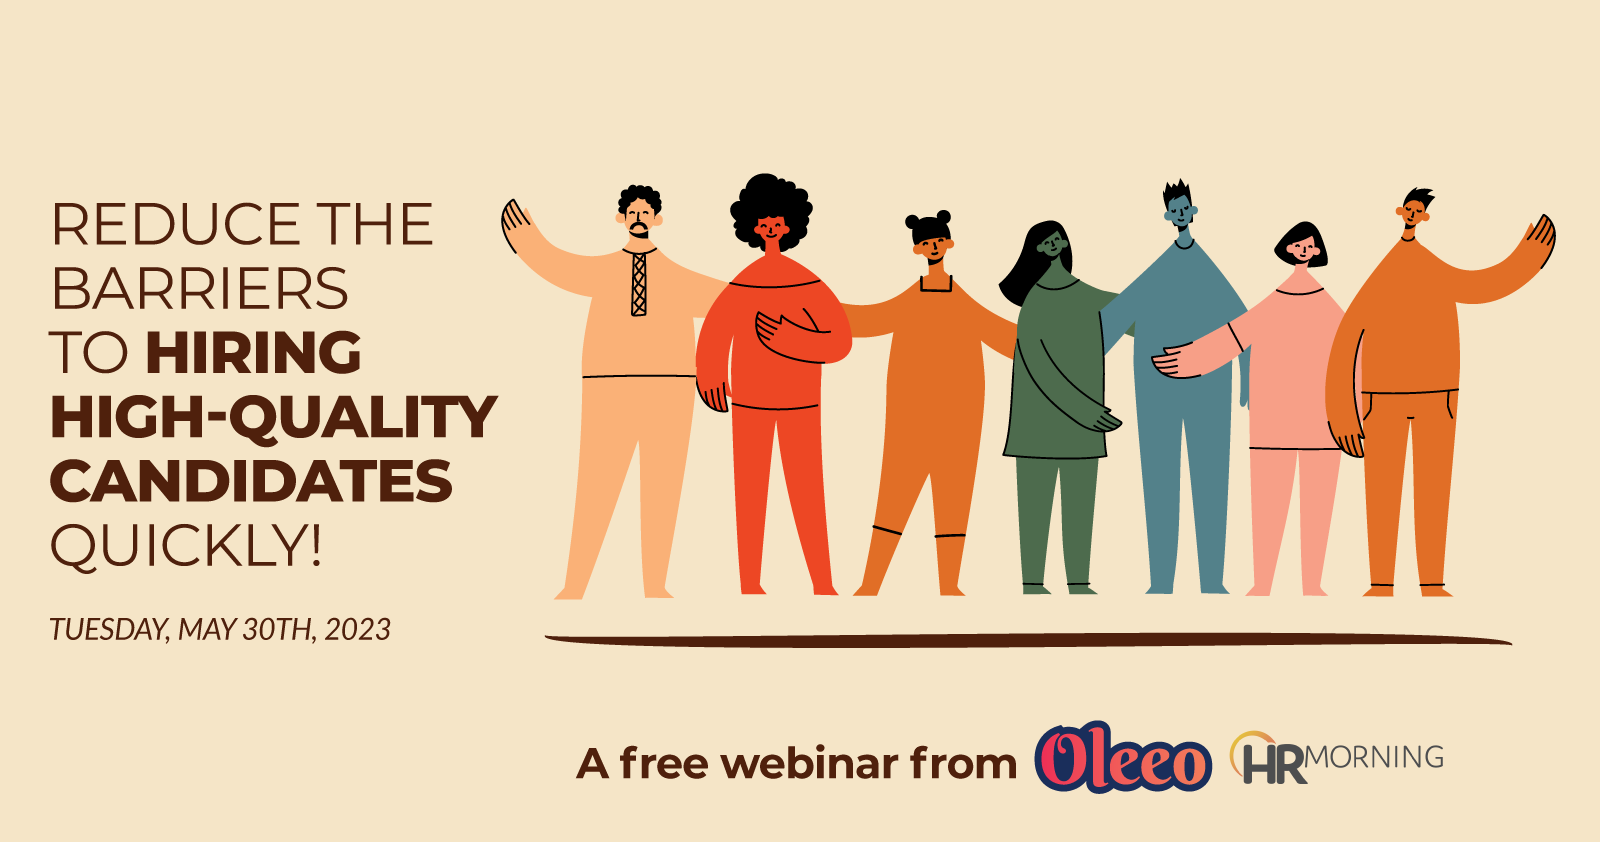 Reduce the Barriers to Hiring High-Quality Candidates Quickly!